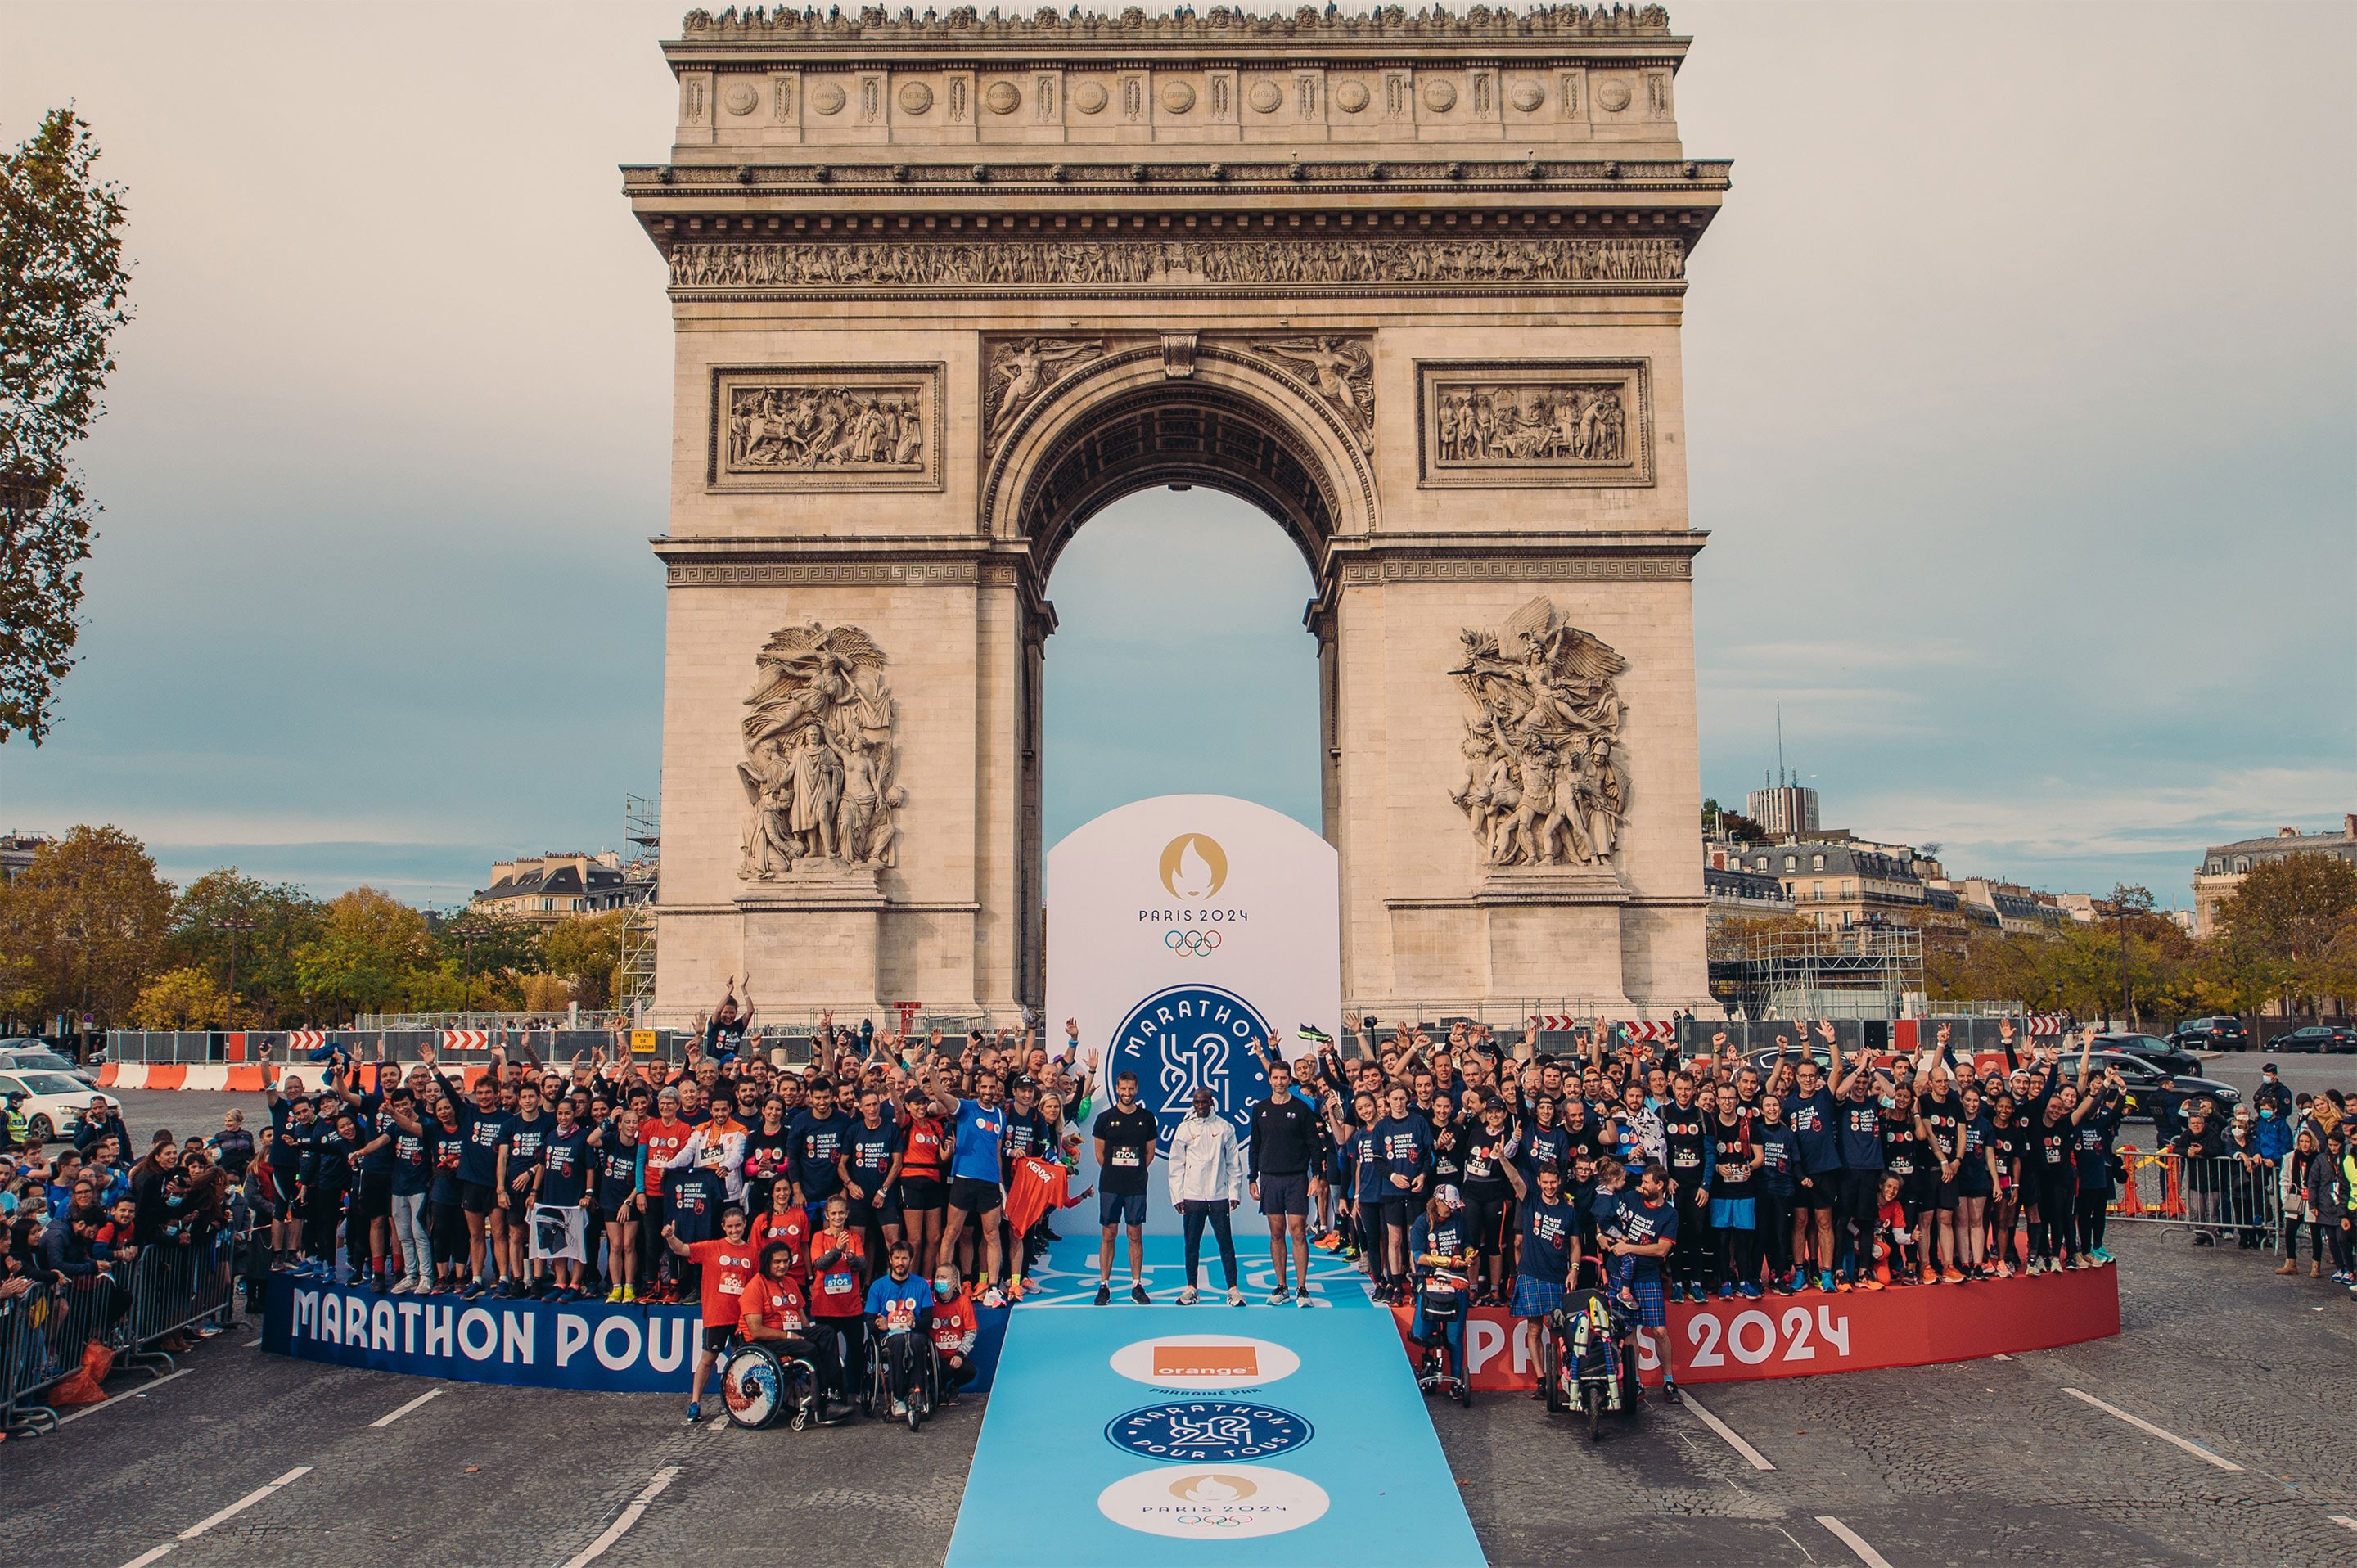 Paris 2024’s ambition to share the Games highlighted by 1,000 Days to